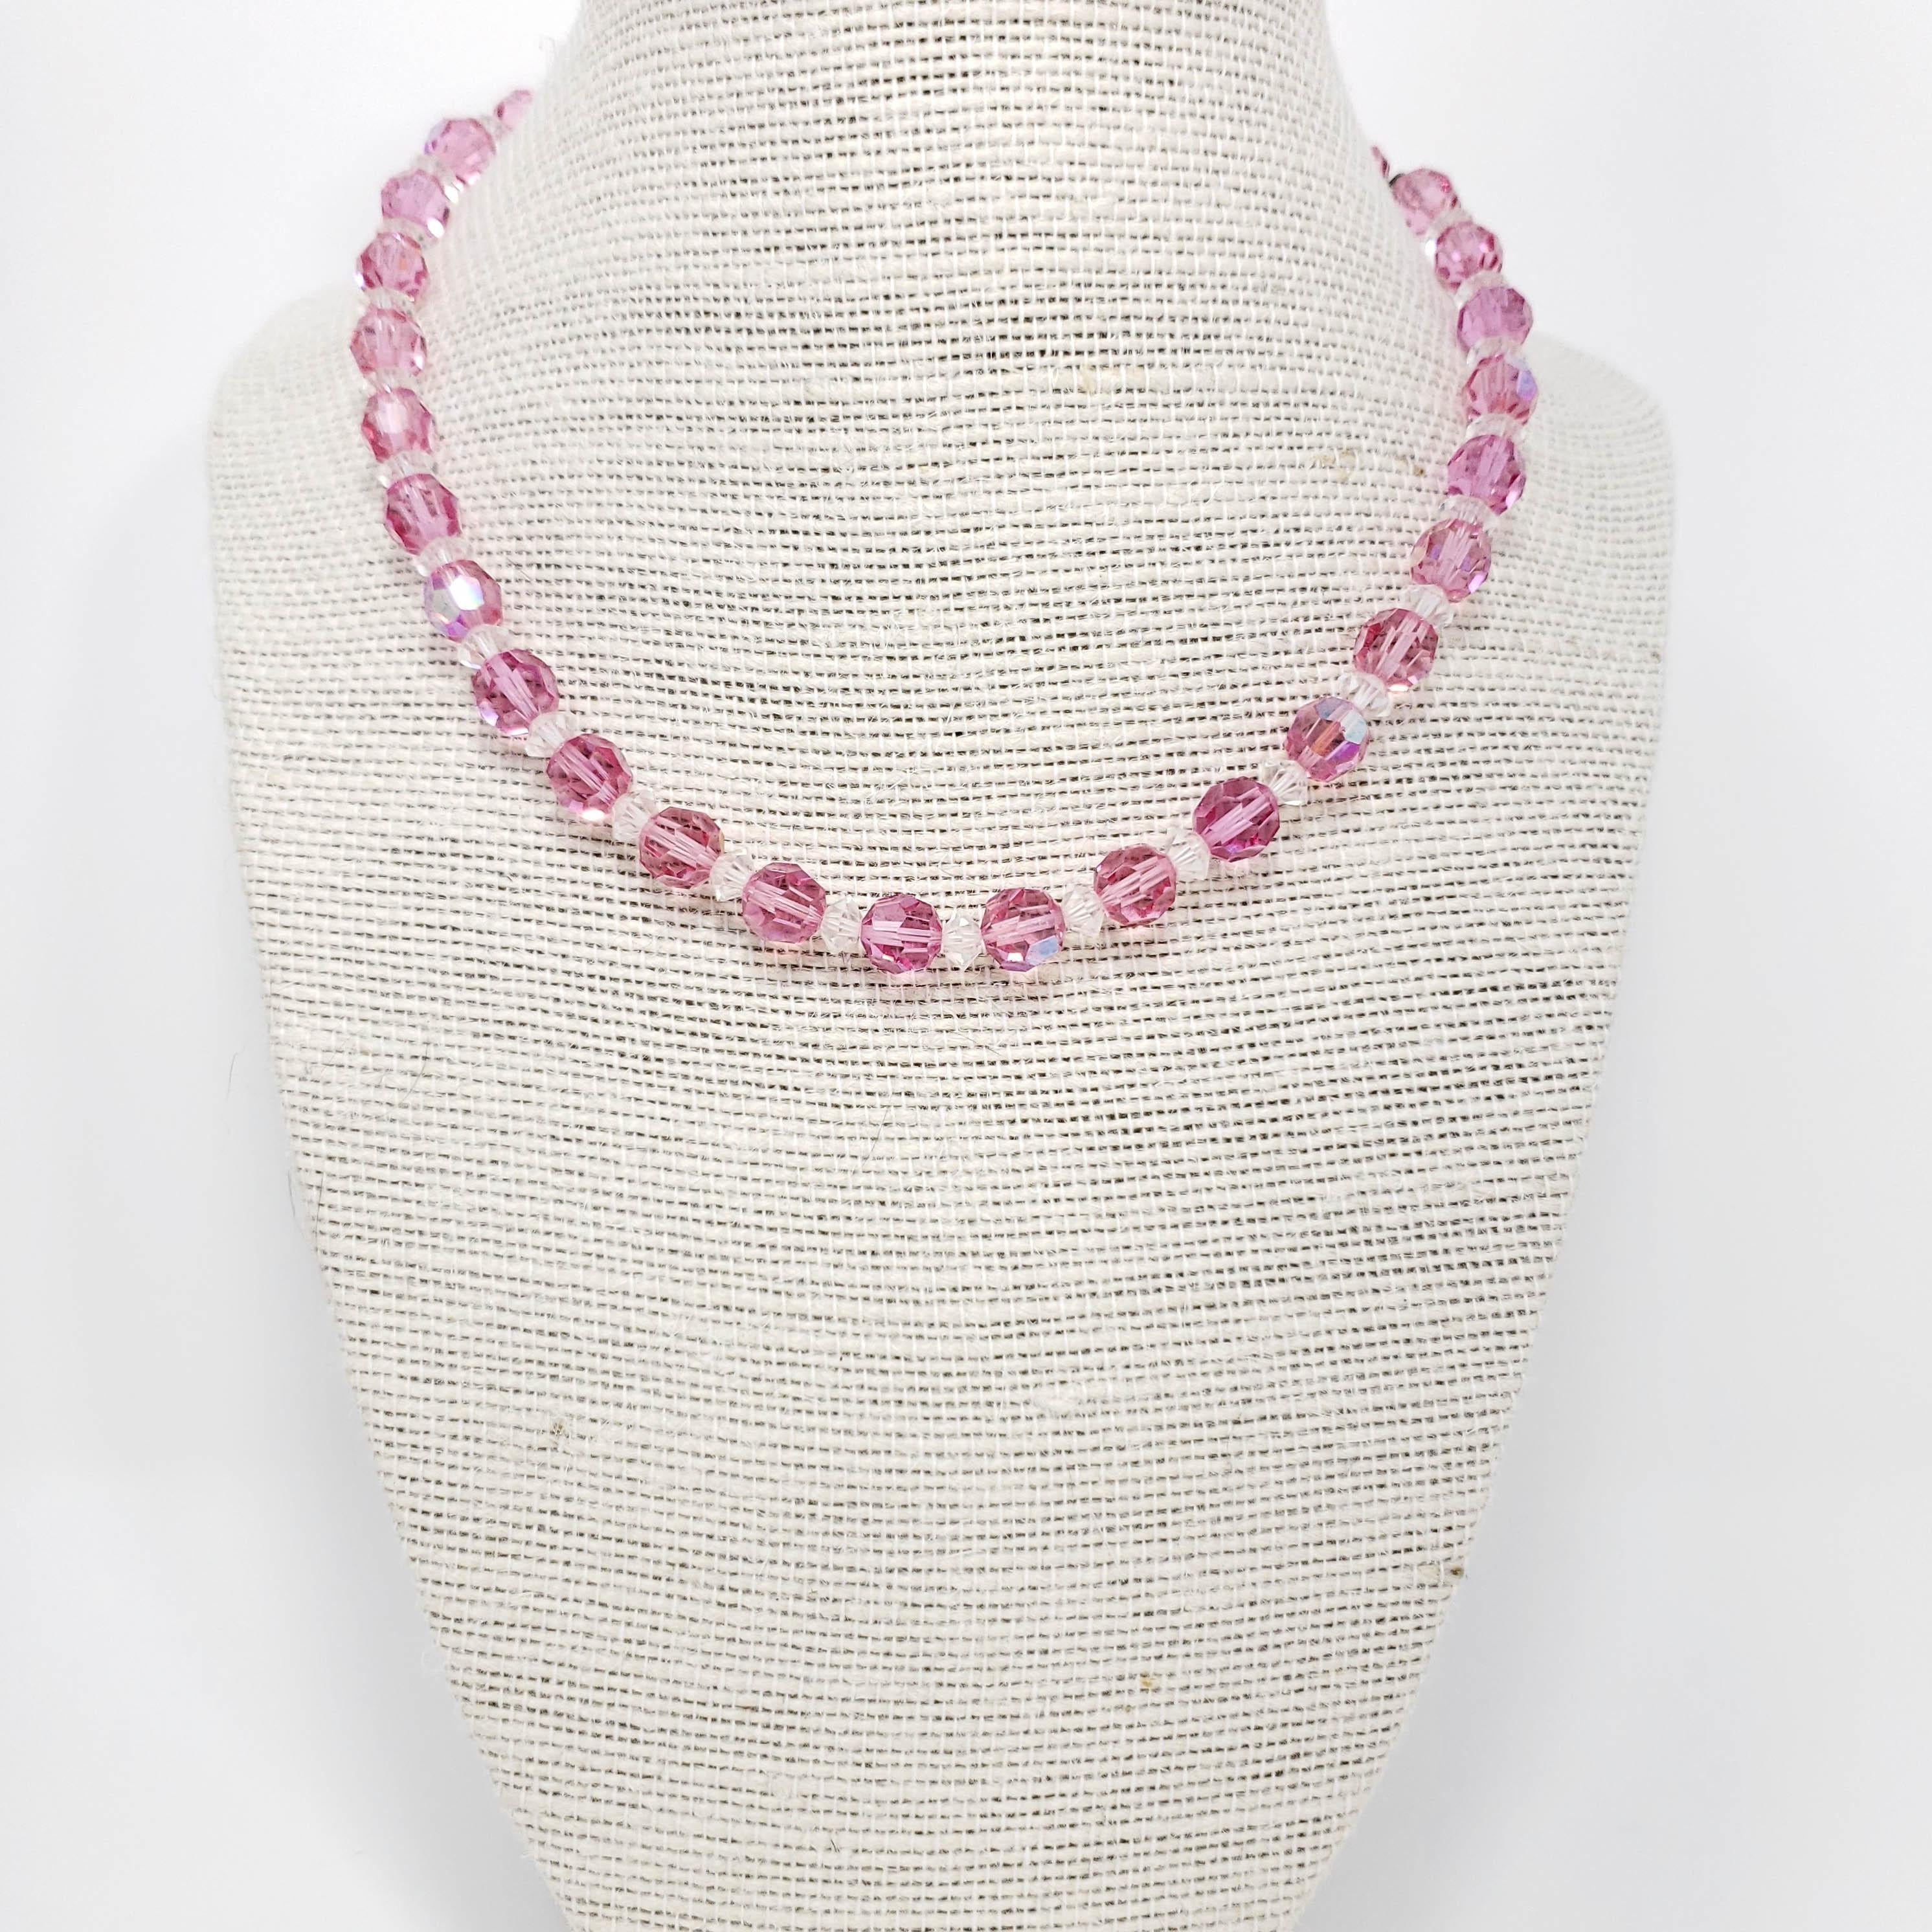 A stylish vintage beaded necklace! Features faceted pink crystal beads, fastened with a vintage brass tone hook clasp.

Length: 33 cm + 6.3 cm extension chain

Halmarks: Laguna
